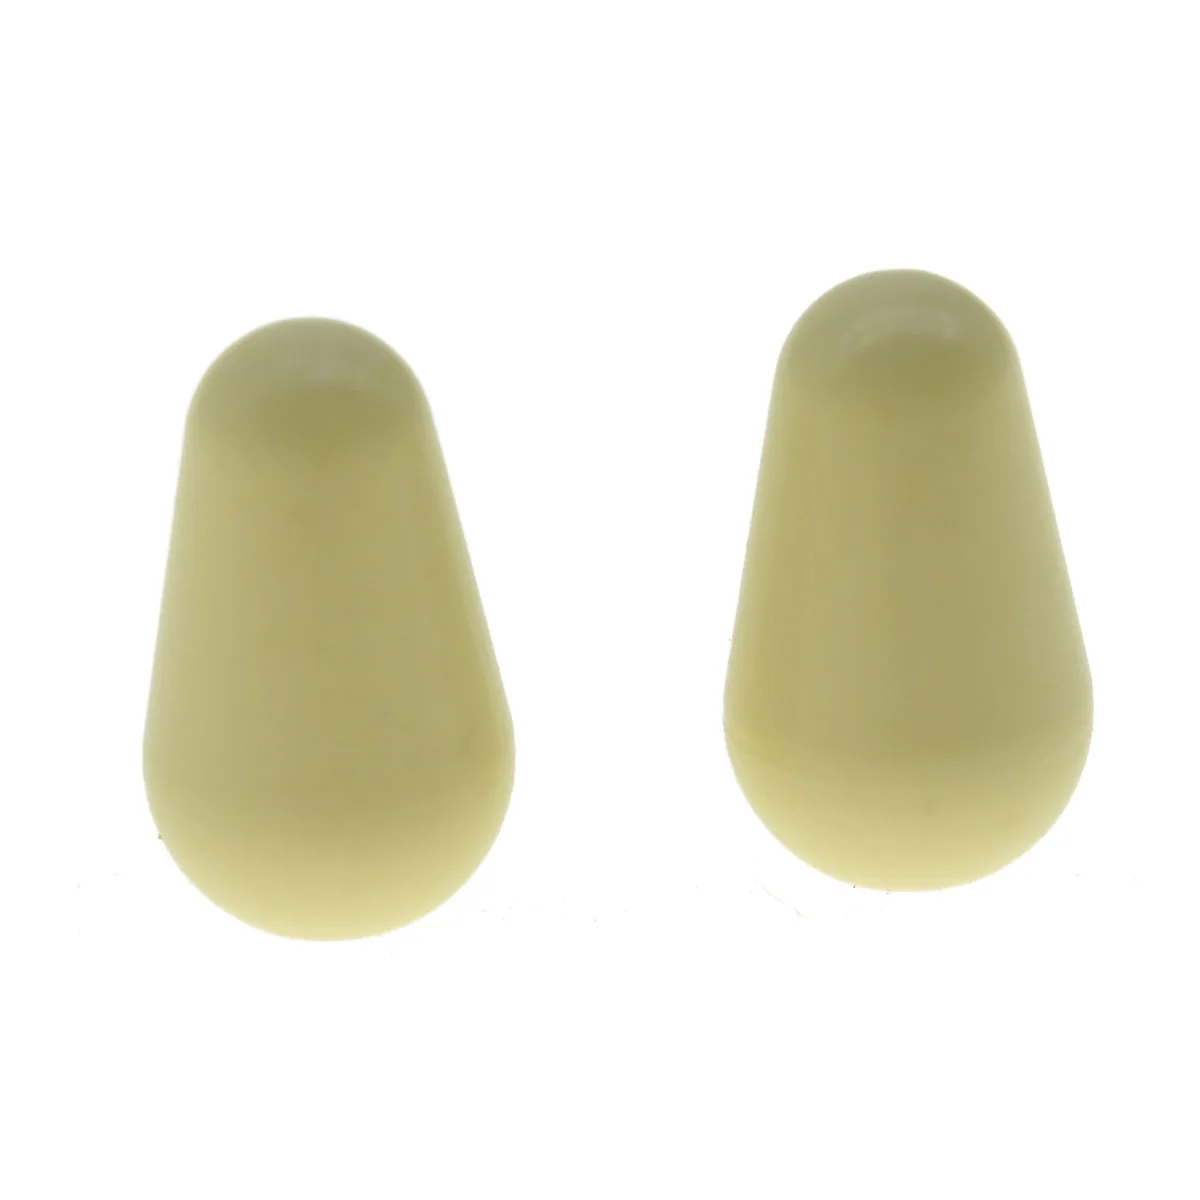 

KAISH 2x Cream Oak Grigsby Type Switch Tip for Strat Lever Switch Cap Knob for Fender USA